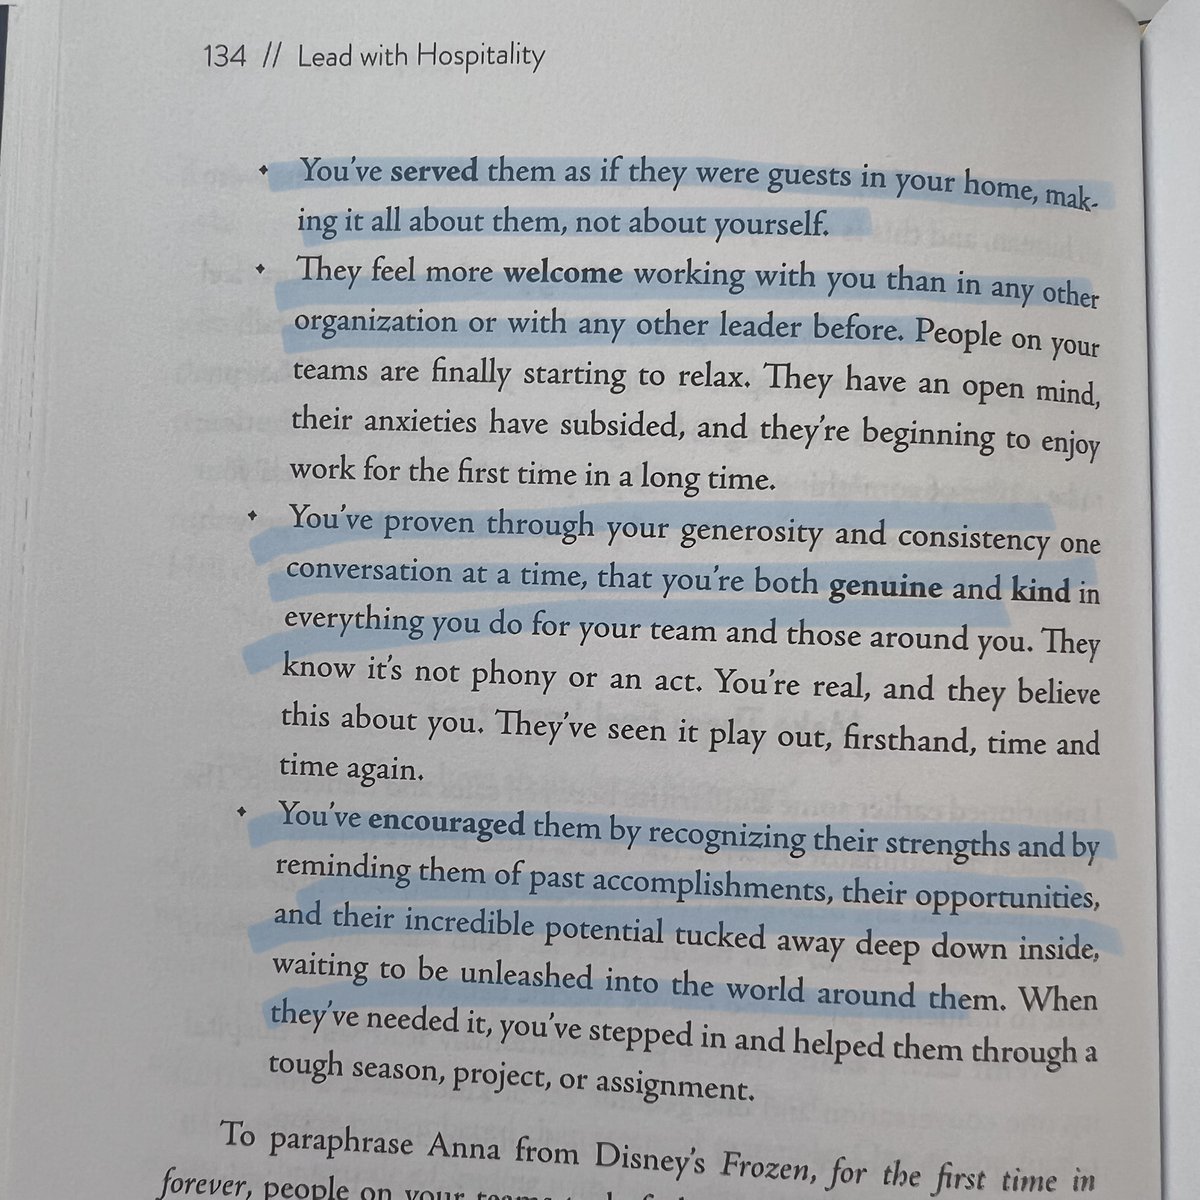 Have you done these four things with your team?

📷 'Lead with Hospitality' page 134

Get your copy of 'Lead with Hospitality' at your favorite bookstore! 

#LeadWithIntegrity #HRStrategies #HospitalityExperts #TeamBuilding #LeadWithPositivity